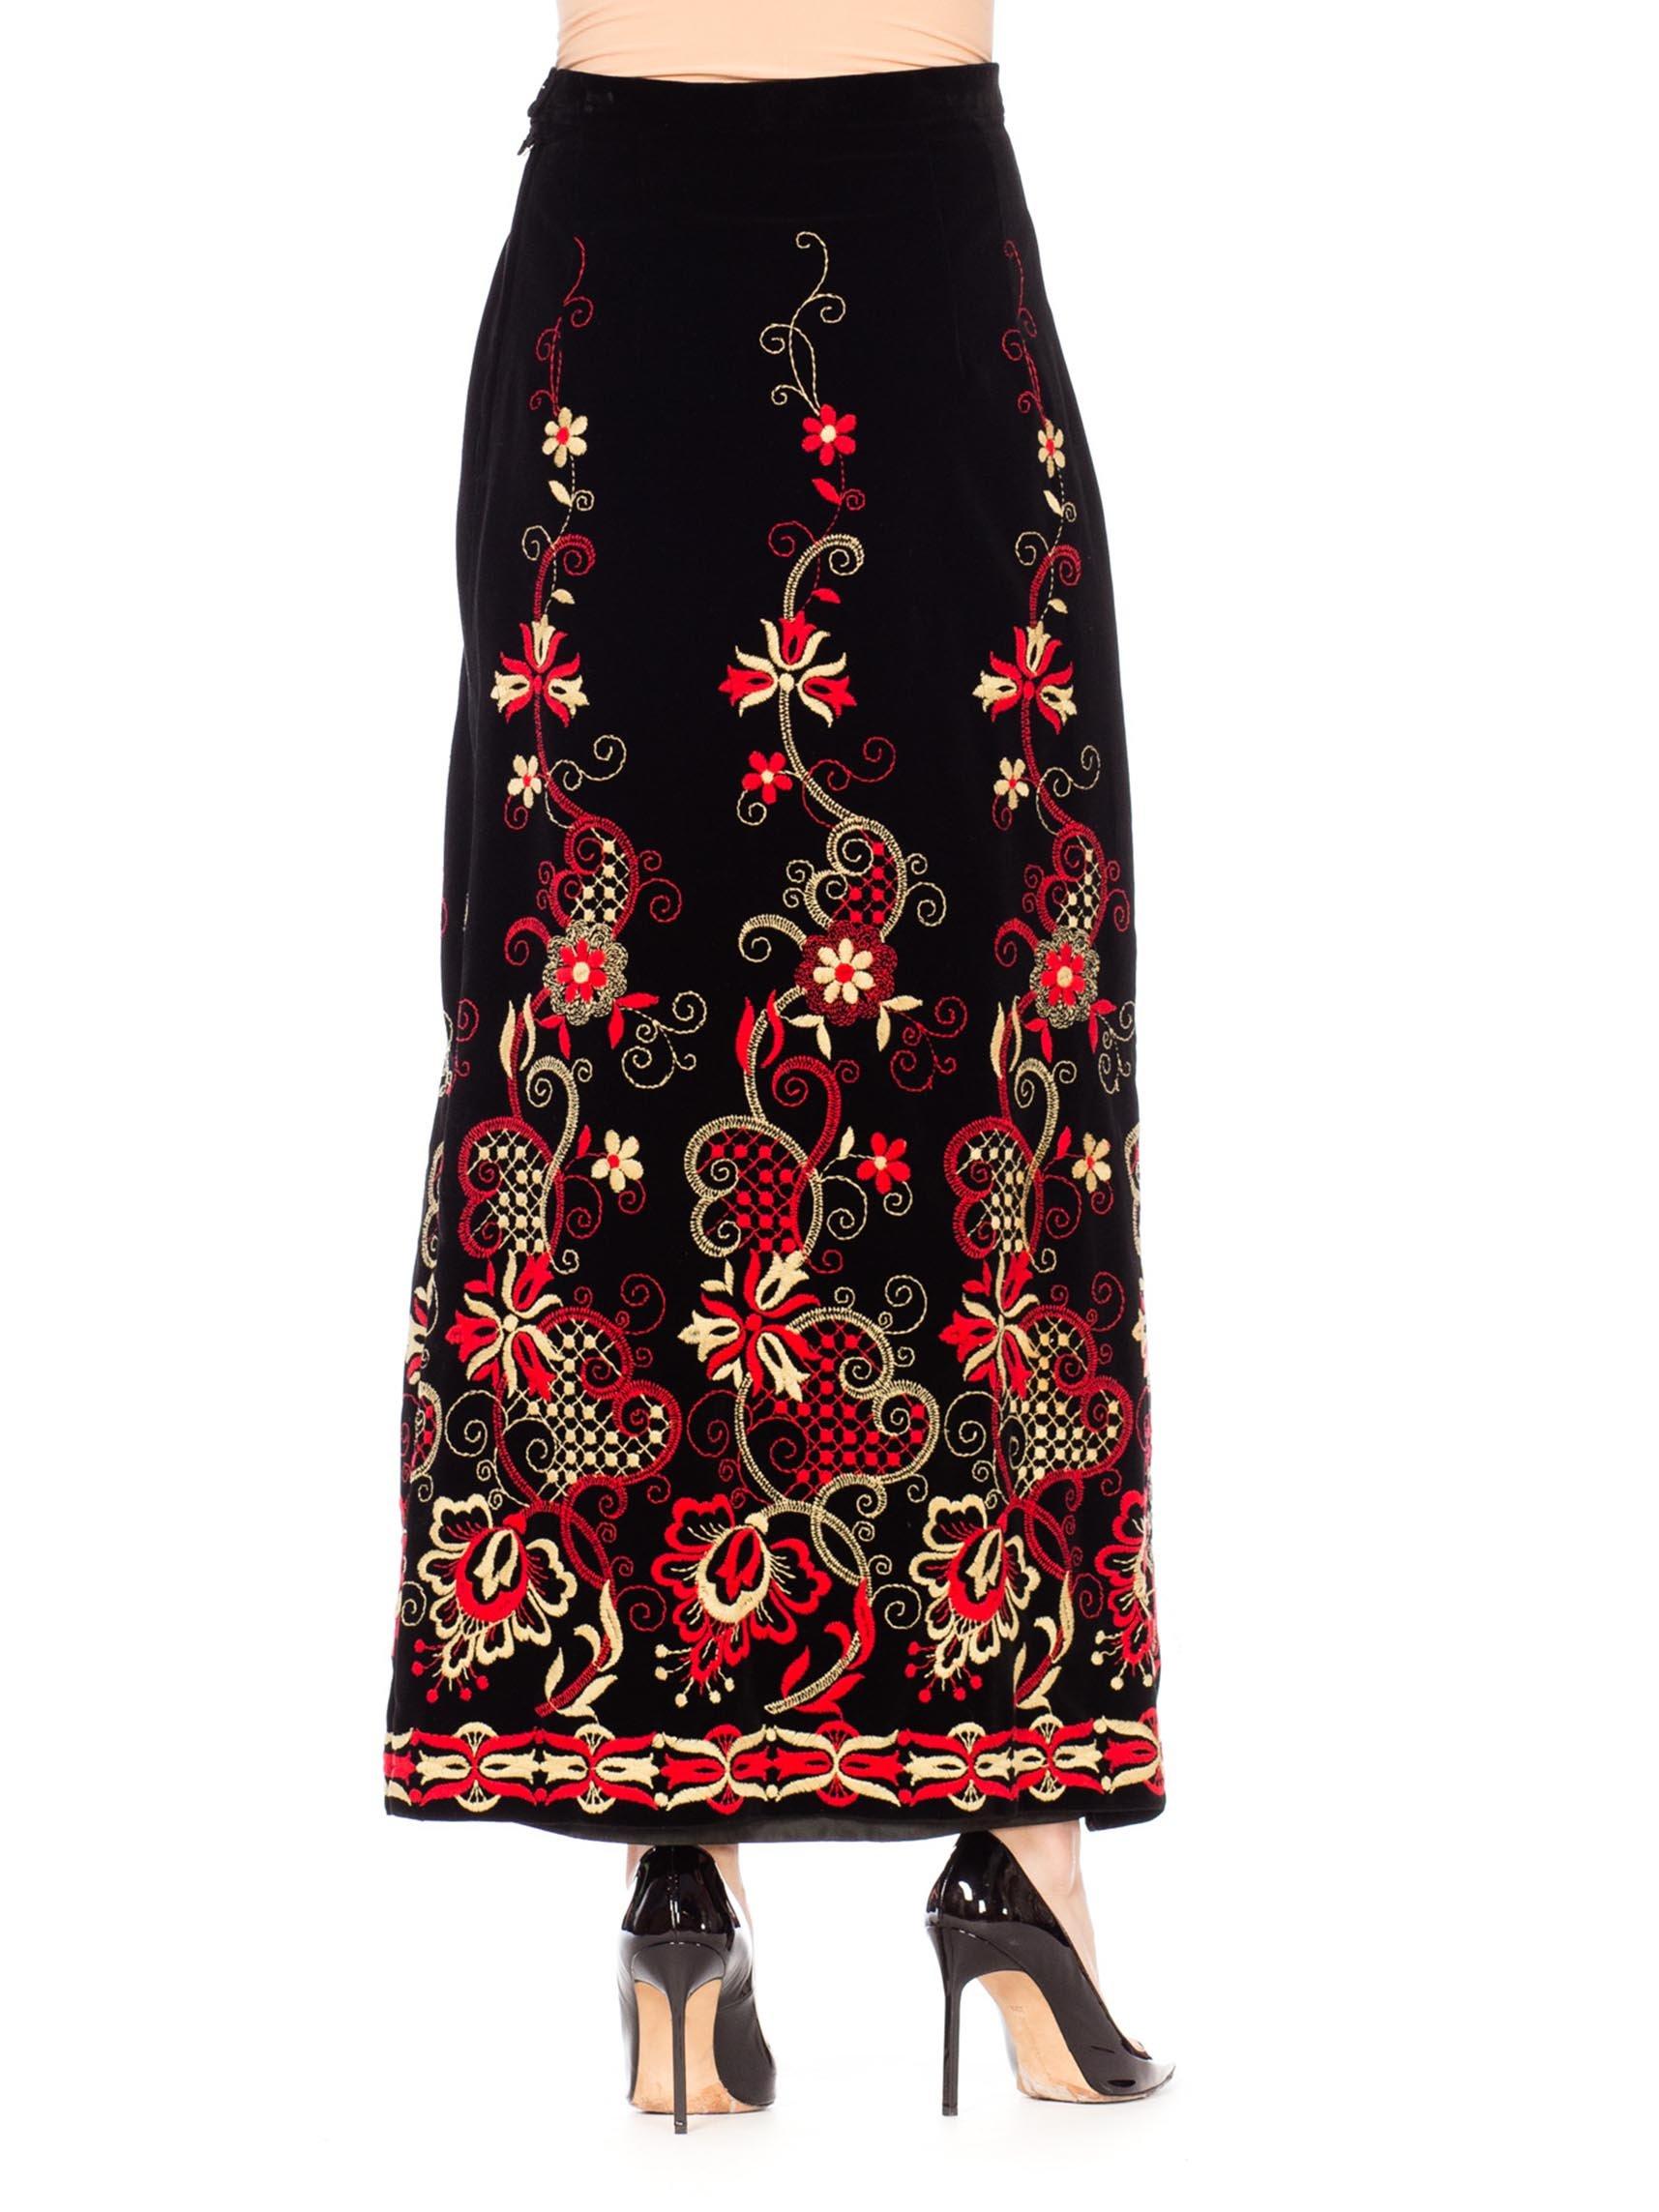 1960S Black Cotton Velvet Maxi Skirt With Red And White Floral Embroidery 1